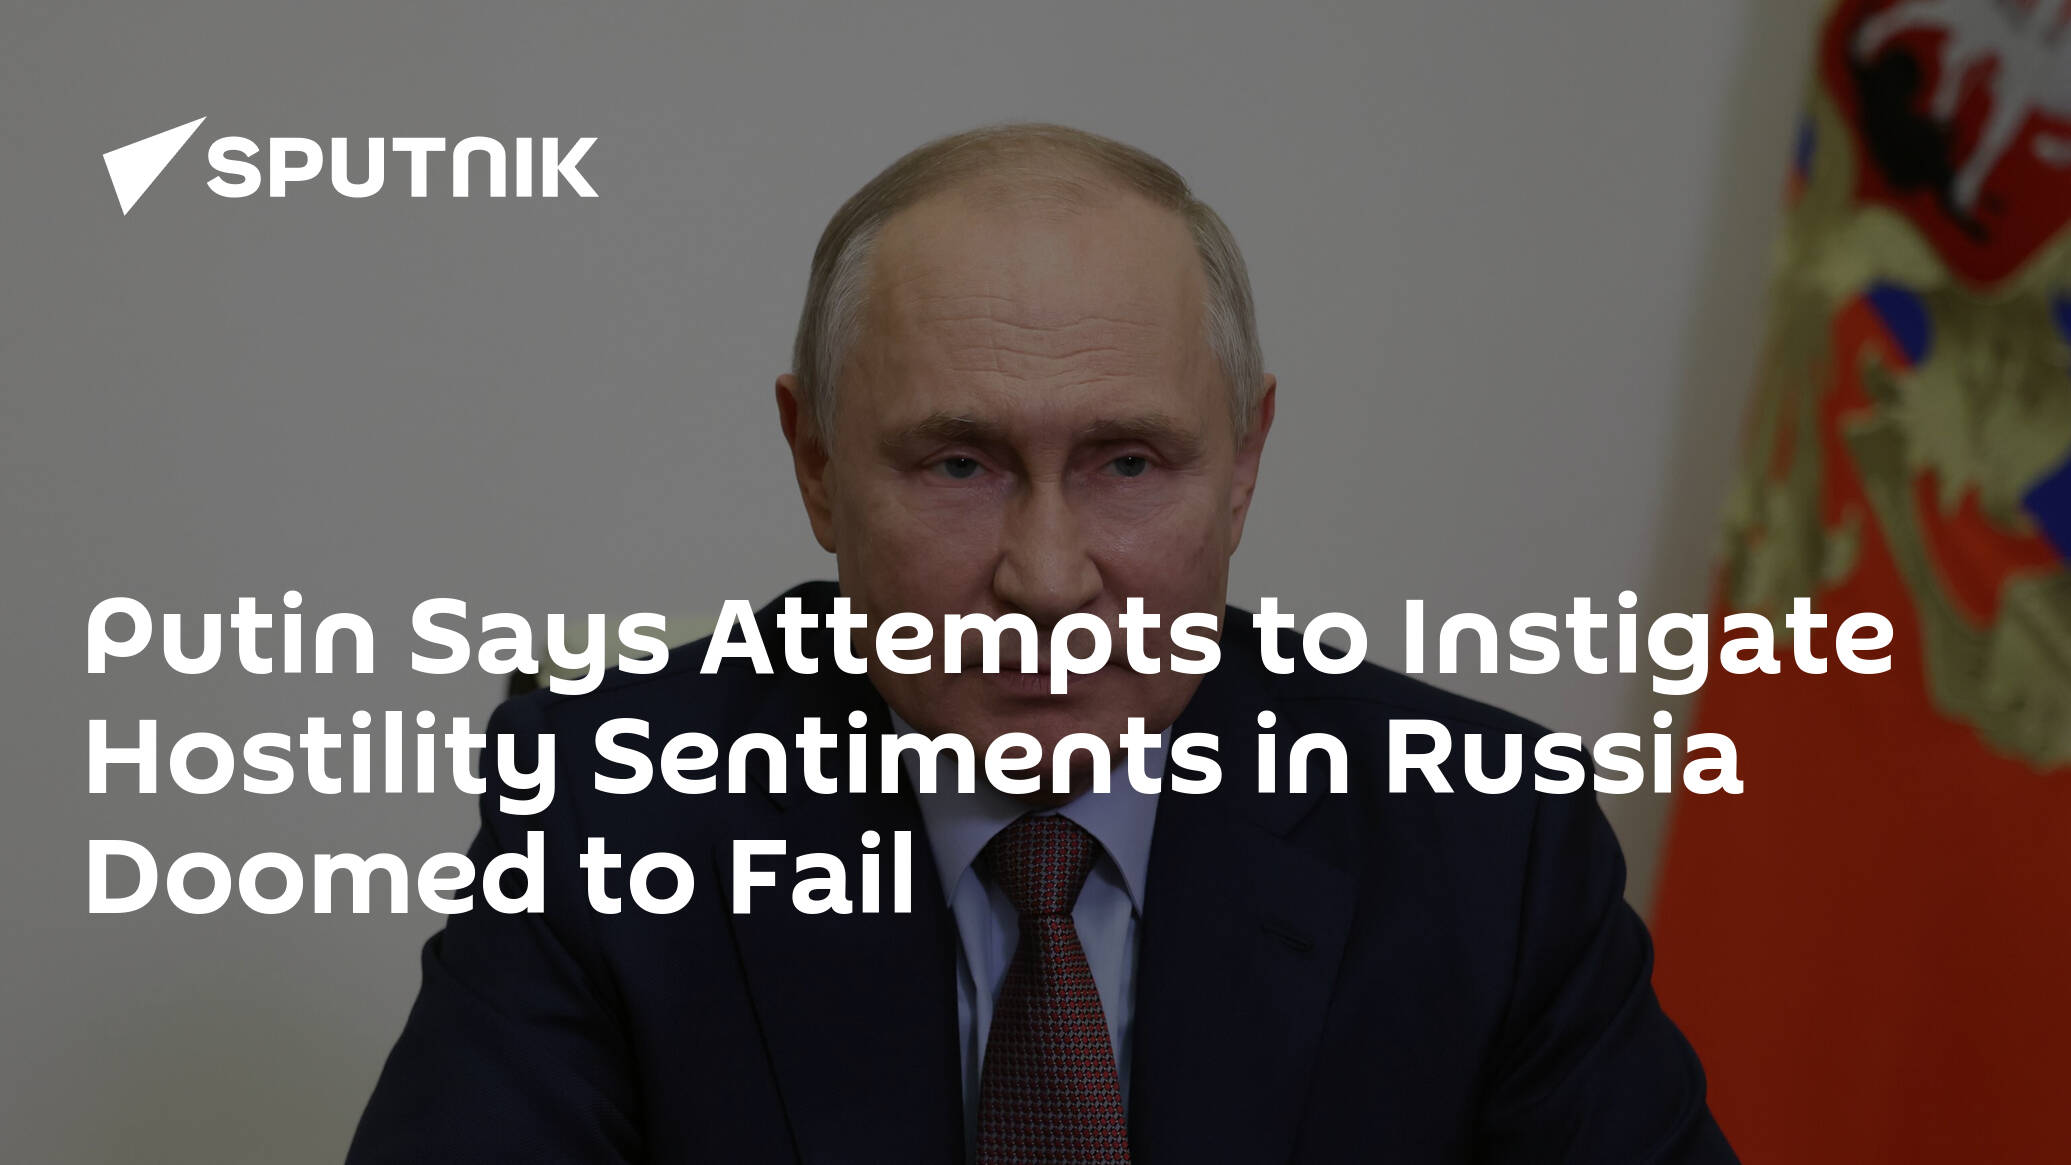 Putin Says Attempts to Instigate Hostility Sentiments in Russia Doomed to Fail